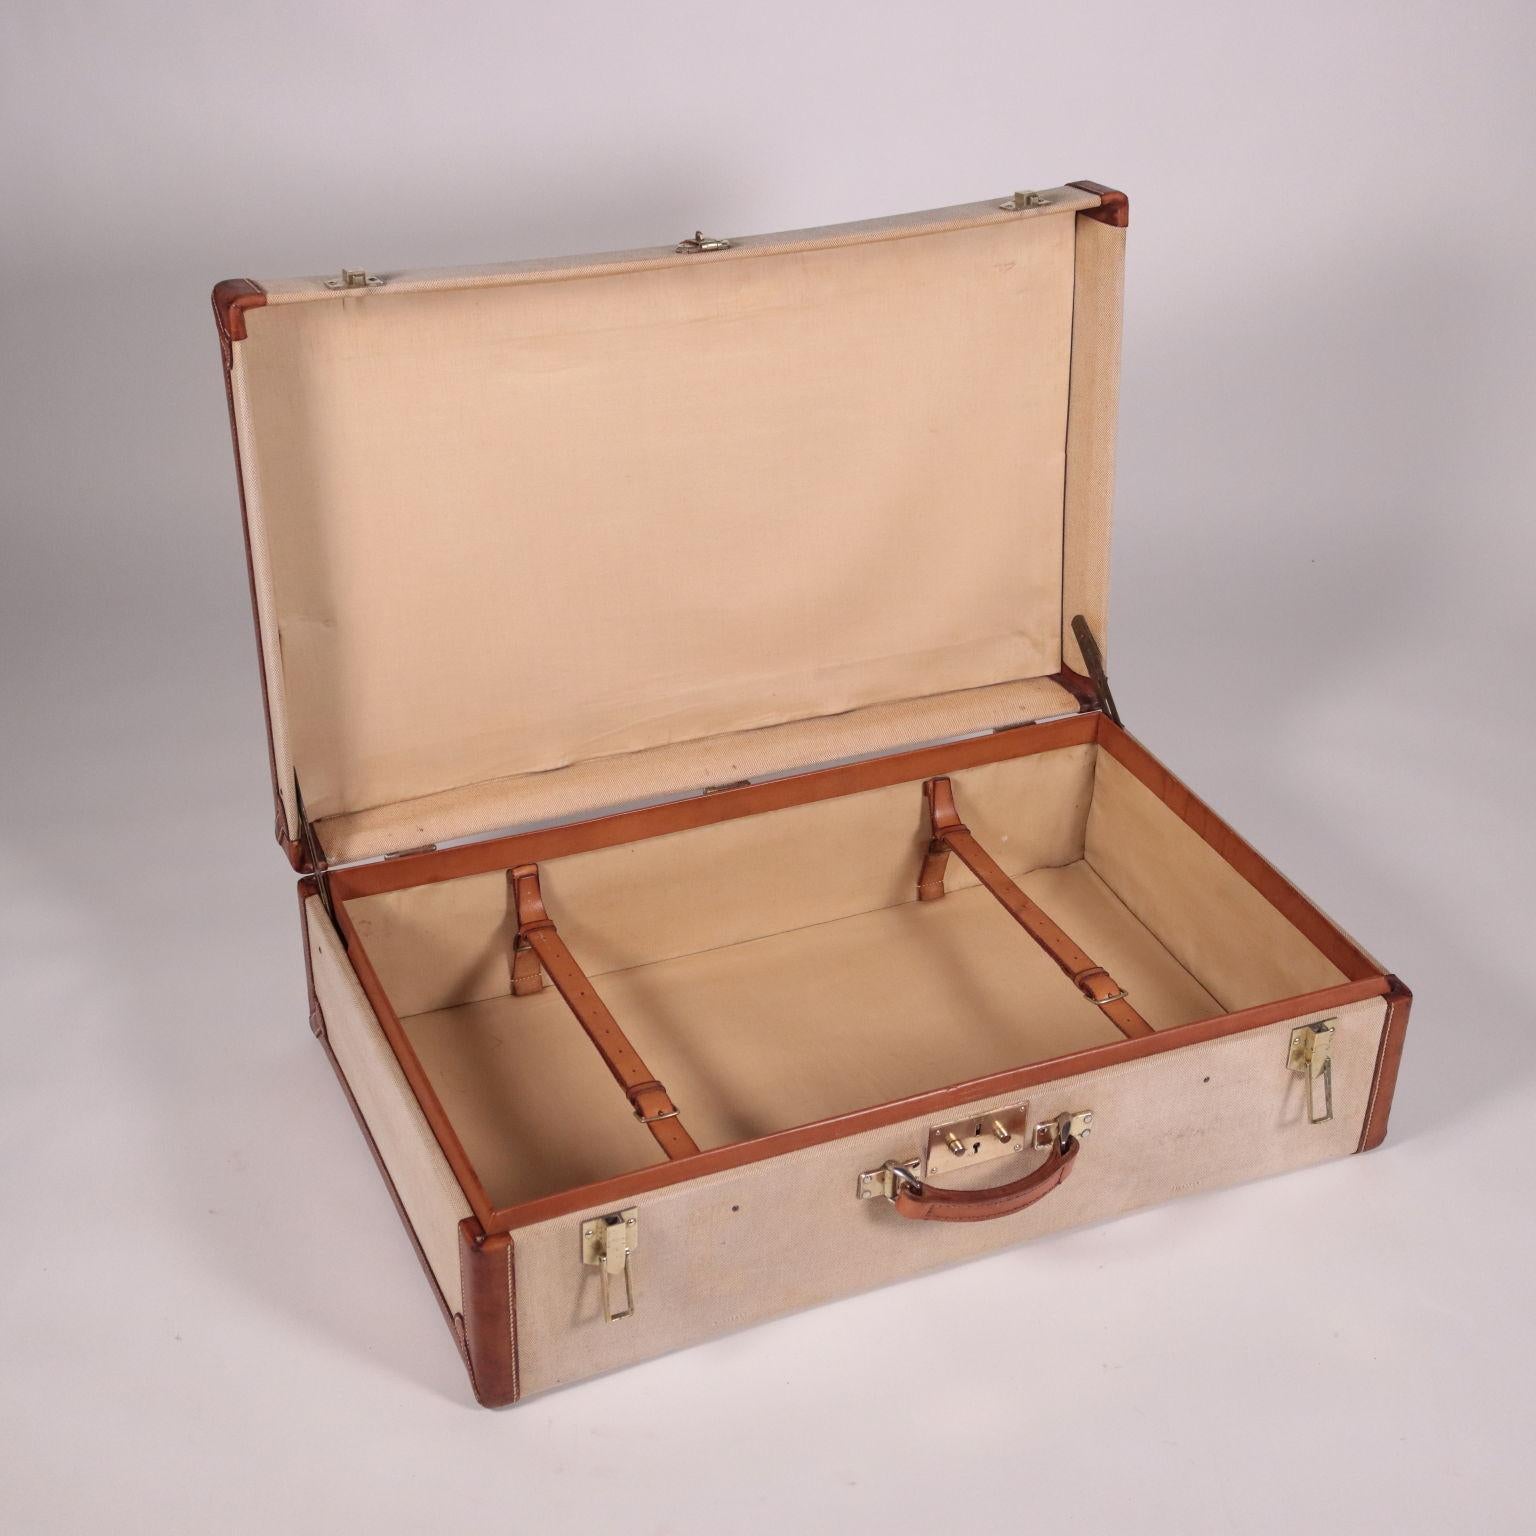 1940s-1950s Hèrmes fabric suitcase. Measure: 74cm
Squared shape with leather edgind and handle (not original handle); the closures are engraved and the interior is lined and has straps.